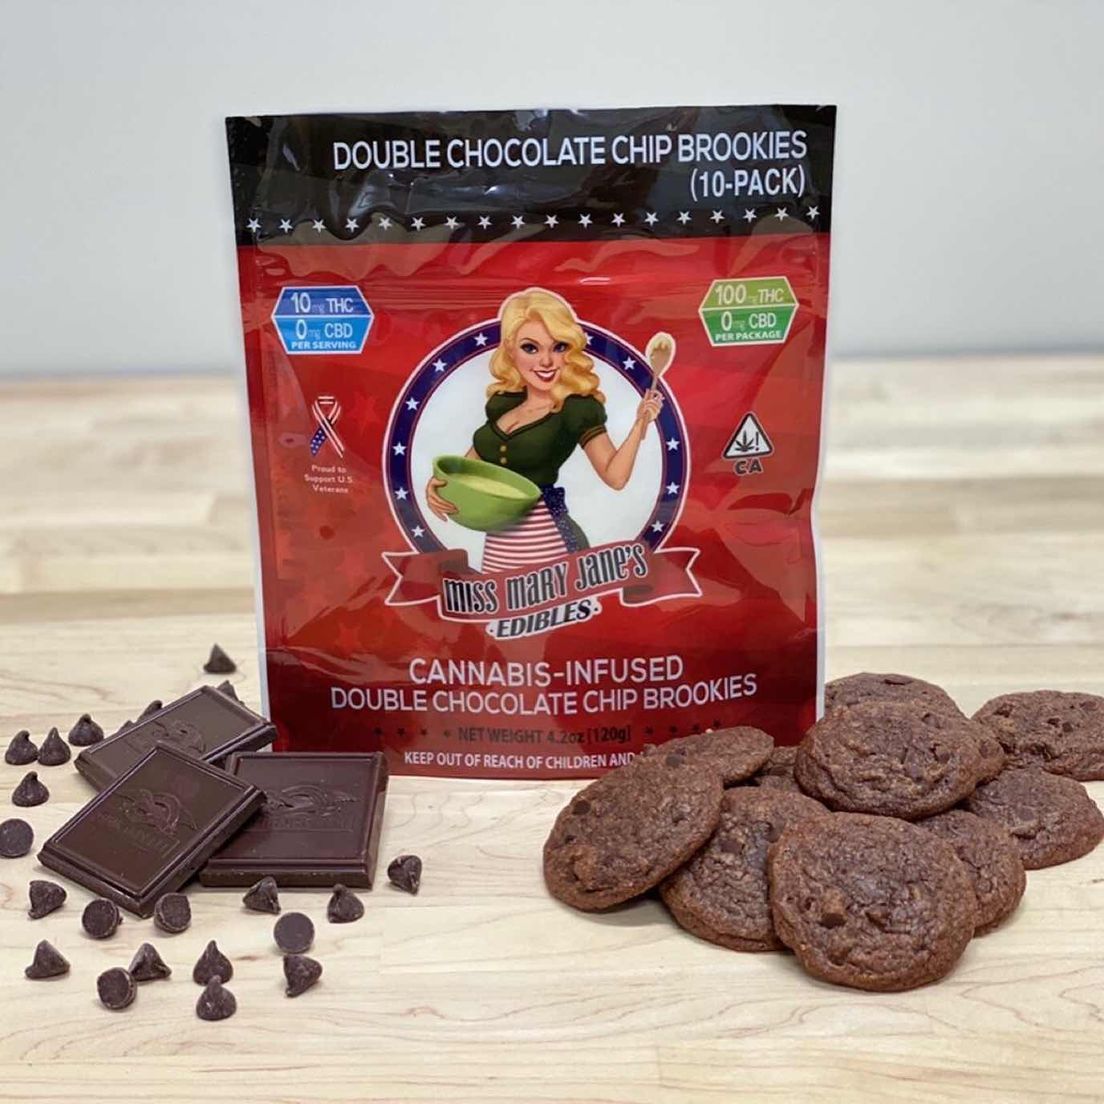 100mg Double Chocolate Chip Brookies - MISS MARY JANES